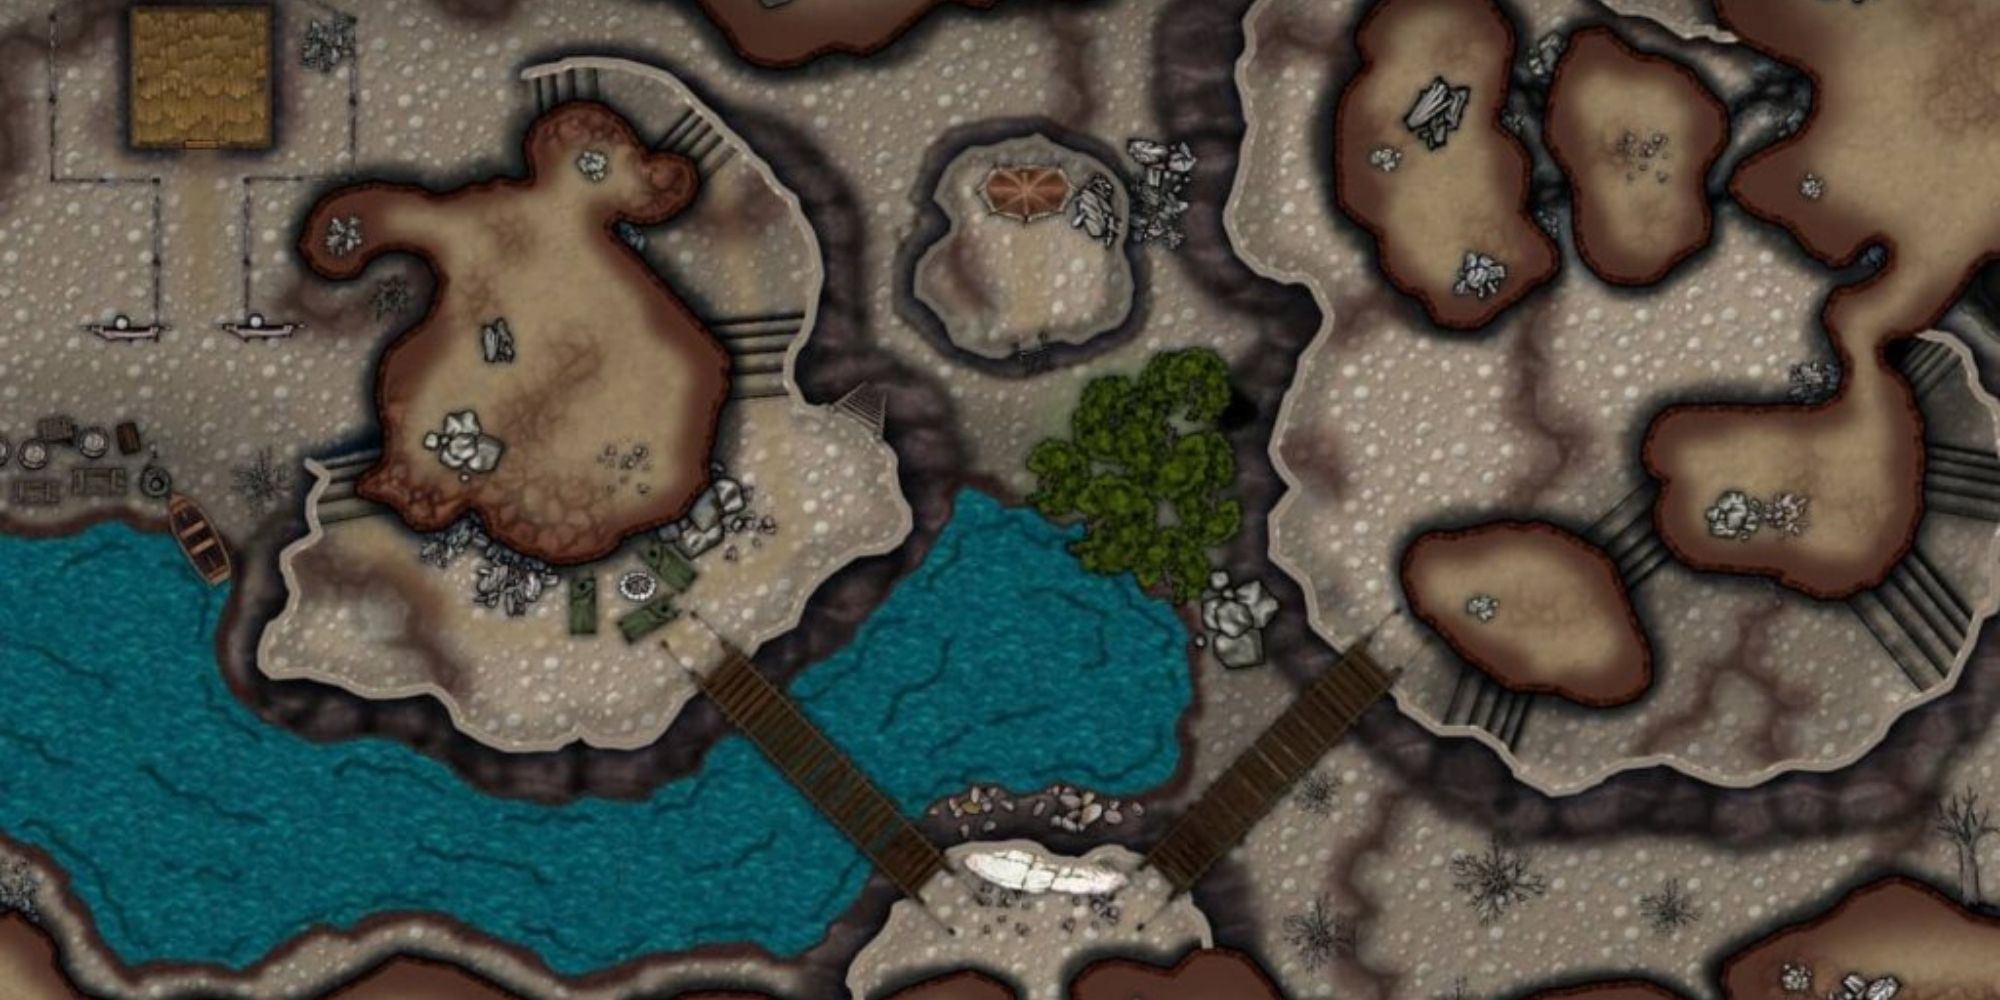 A canyon dungeon map with a dusty desert feel and some skeletons